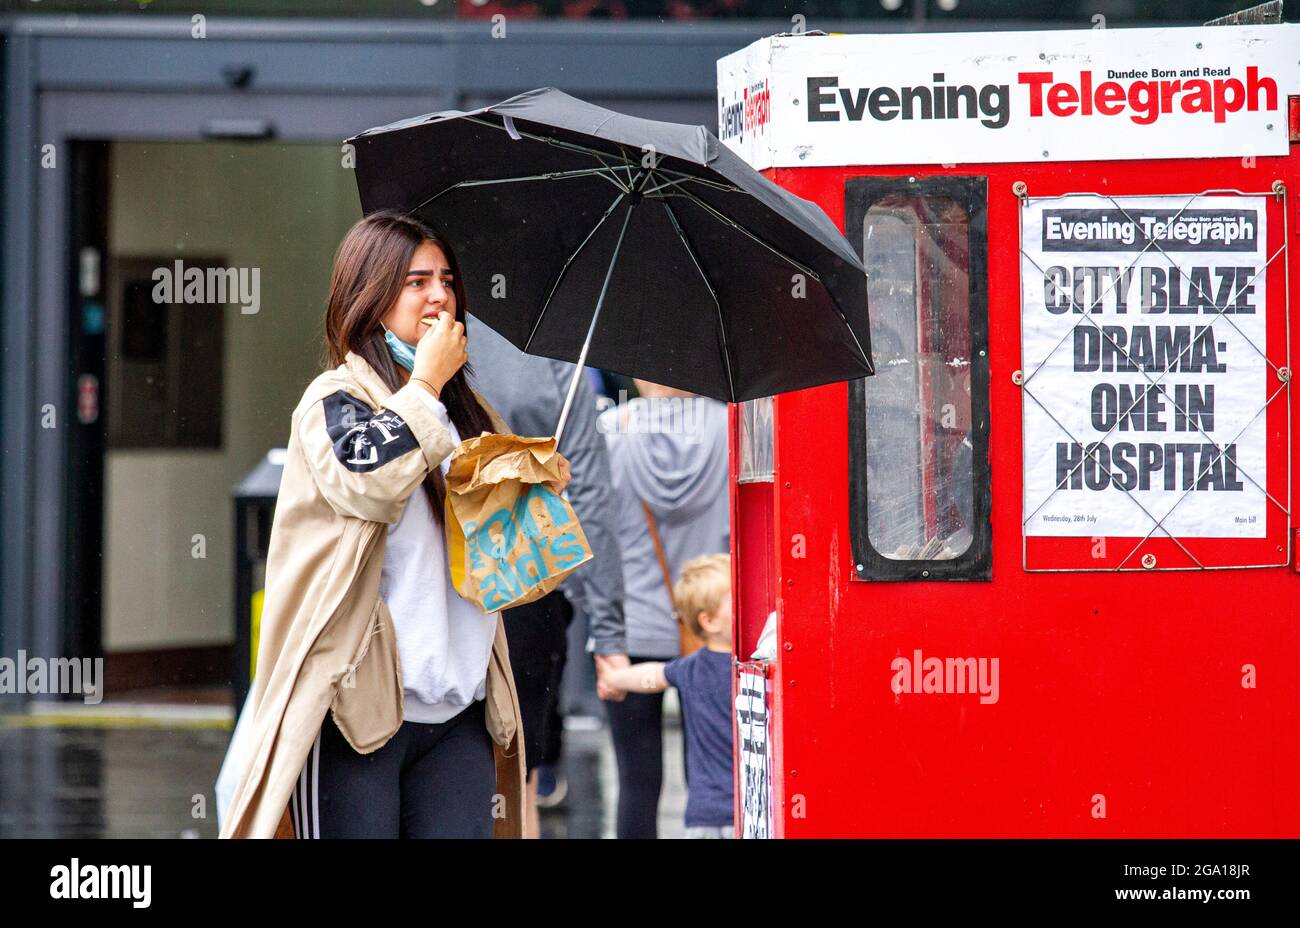 Dundee, Tayside, Scotland, UK. 28th July, 2021. UK Weather: Humid and overcast day with outbreaks of heavy rain across North East Scotland with temperatures reaching 21°C. Local residents are caught out in sudden outbursts of heavy rain whilst out shopping in Dundee city centre. Credit: Dundee Photographics/Alamy Live News Stock Photo